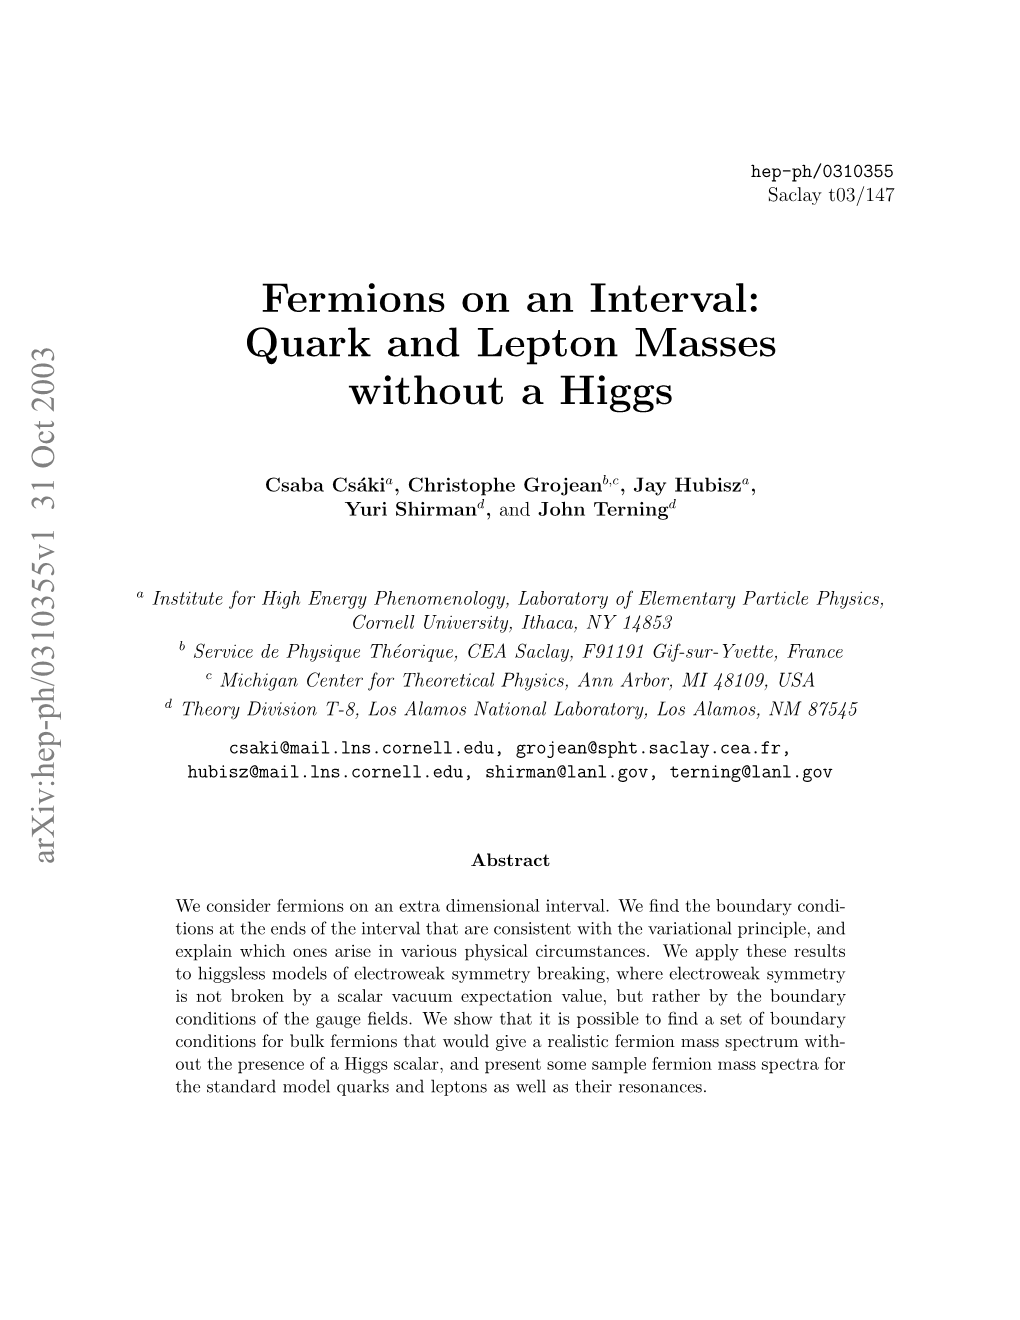 Fermions on an Interval: Quark and Lepton Masses Without a Higgs